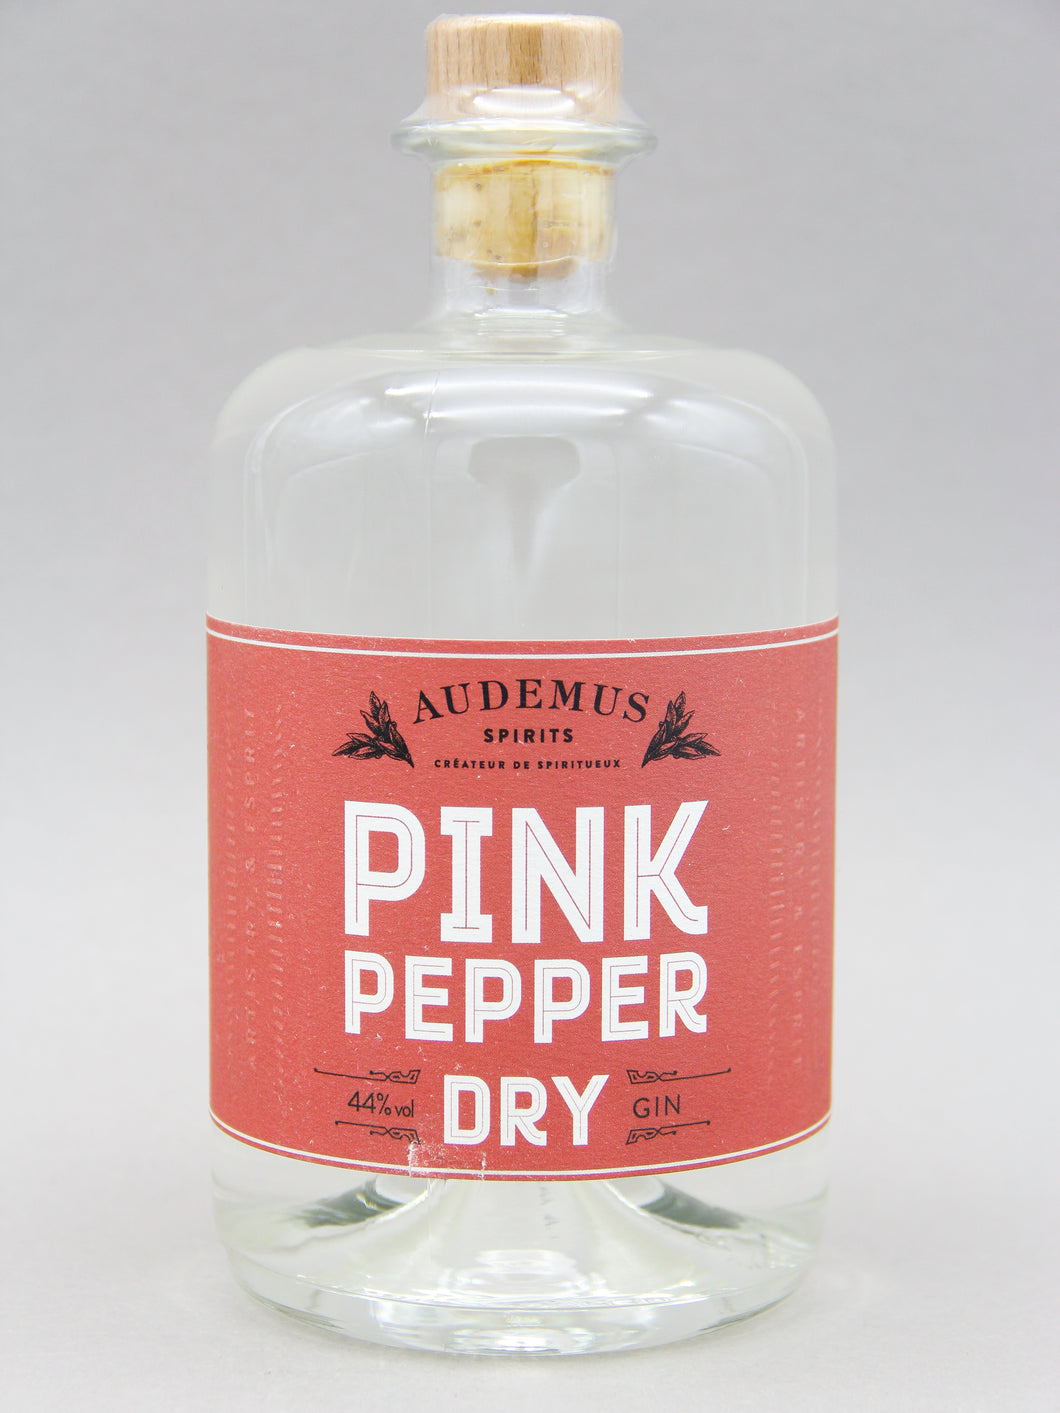 Audemus Spirits, Pink Pepper Dry Gin, Limited 1ed Release, Cognac, France (44%, 70cl)